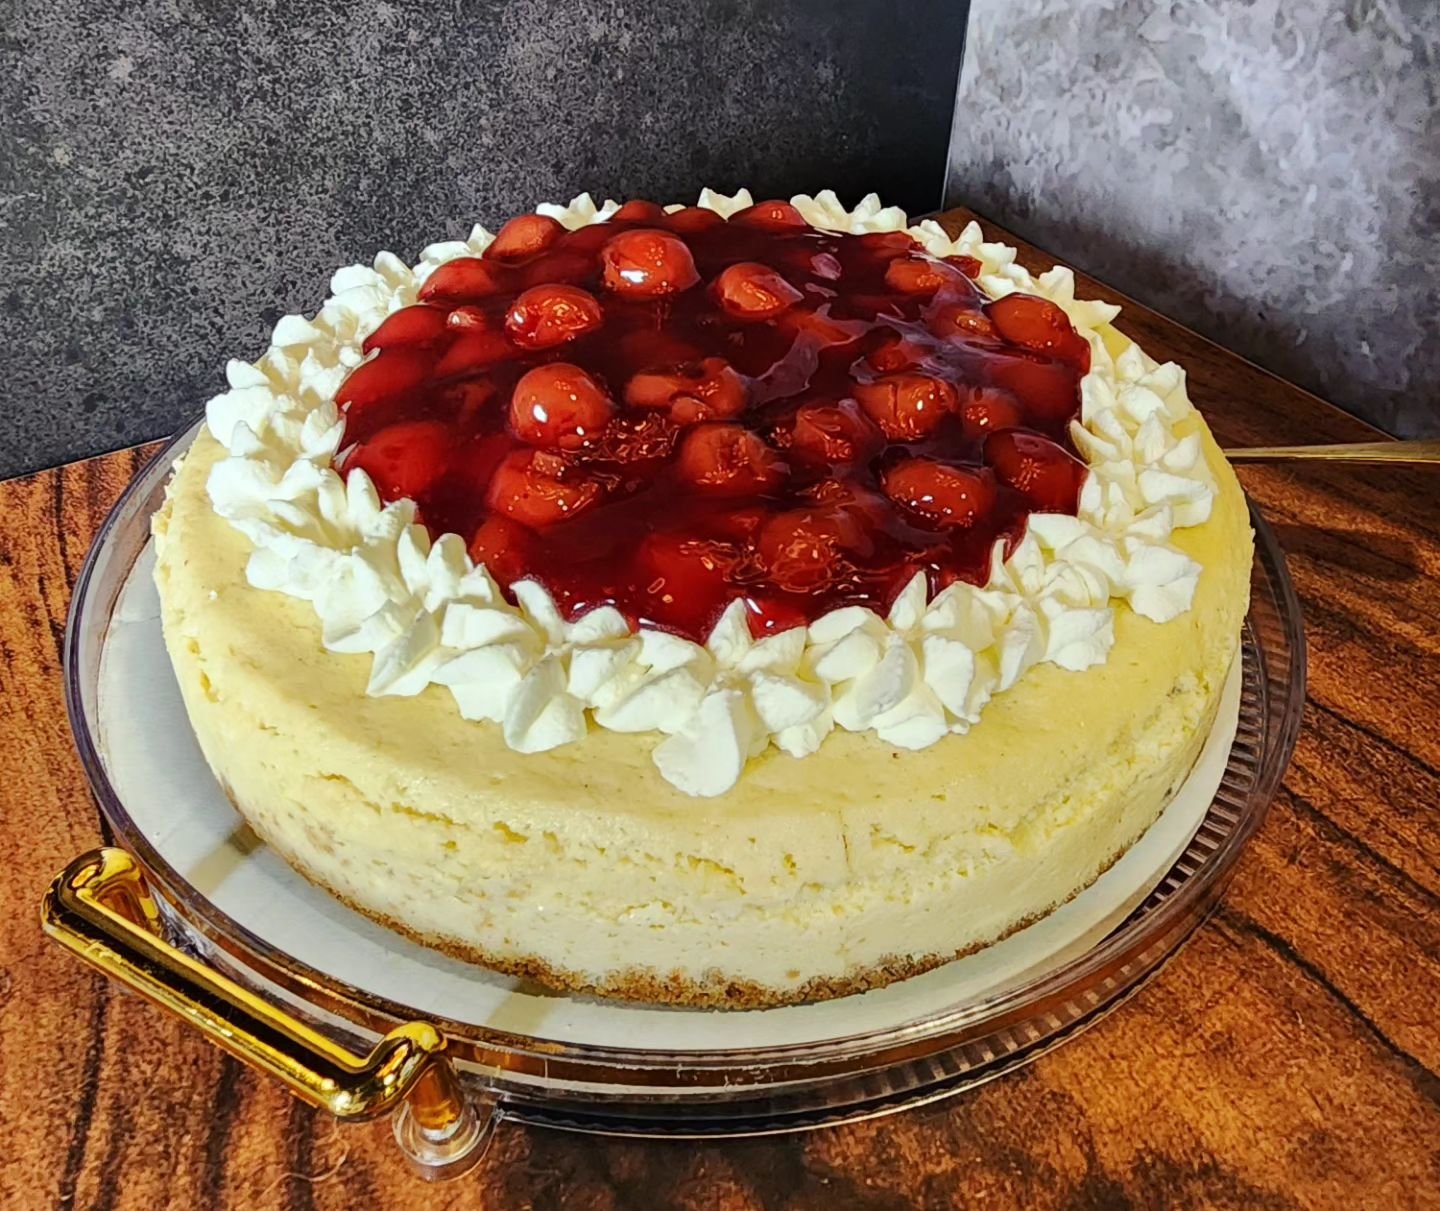 national cherry cheesecake day! 
&amp; guess what we almost always have for you?!?
🍒🍒🍒
yep! 
large, small, mini, and slices! 
every day! ❣️

6-6 today &amp; tomorrow
618-491-0901 
Www.steelcitycheesecakes.com
4025 Pontoon Road